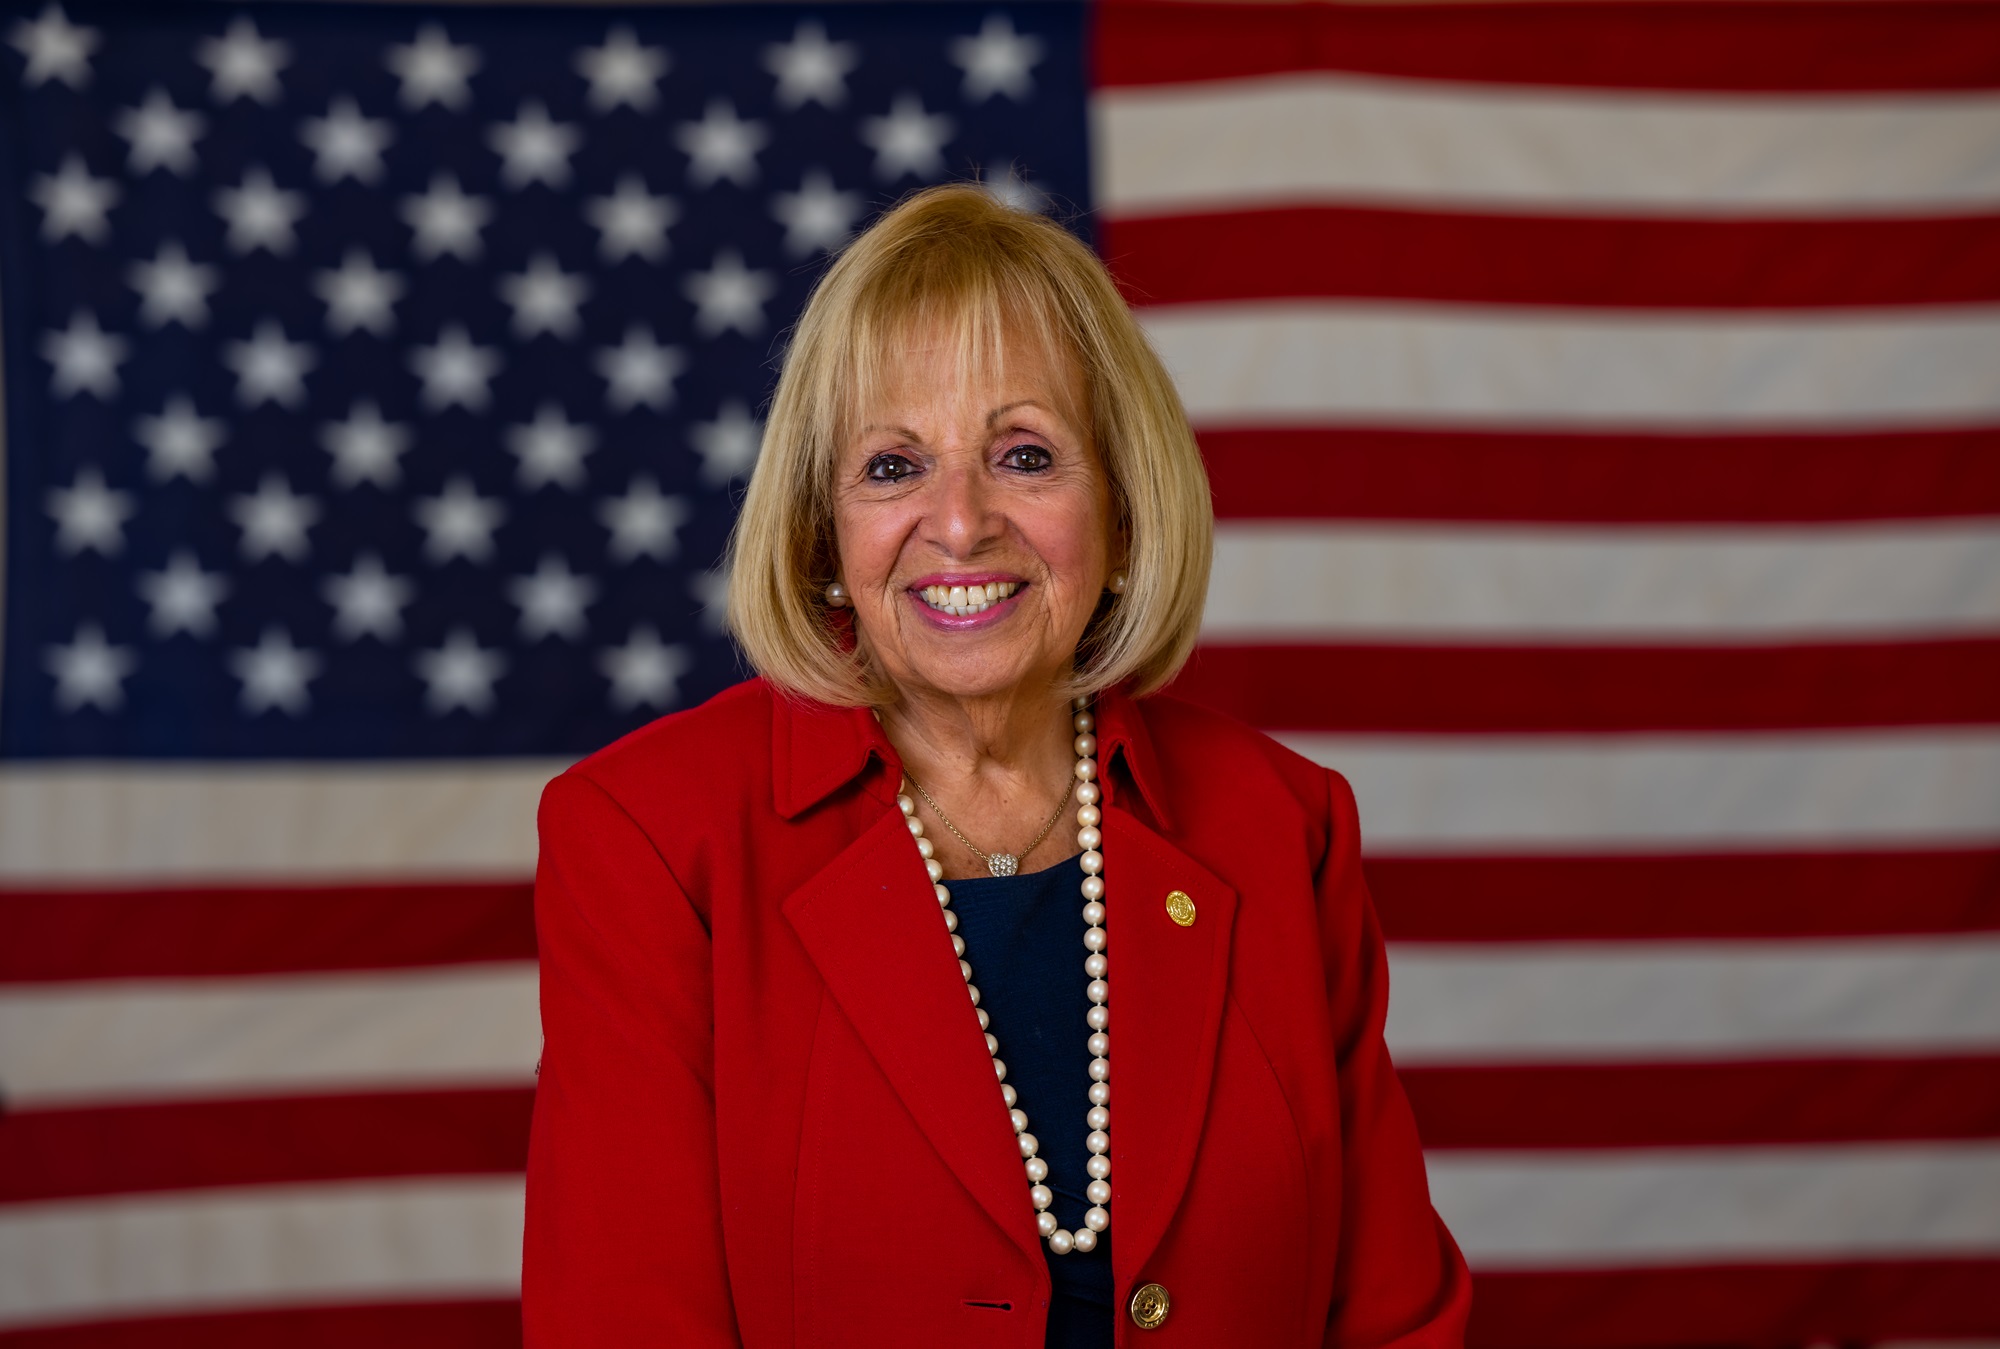 Angie Carpenter in red, with USA Flag background